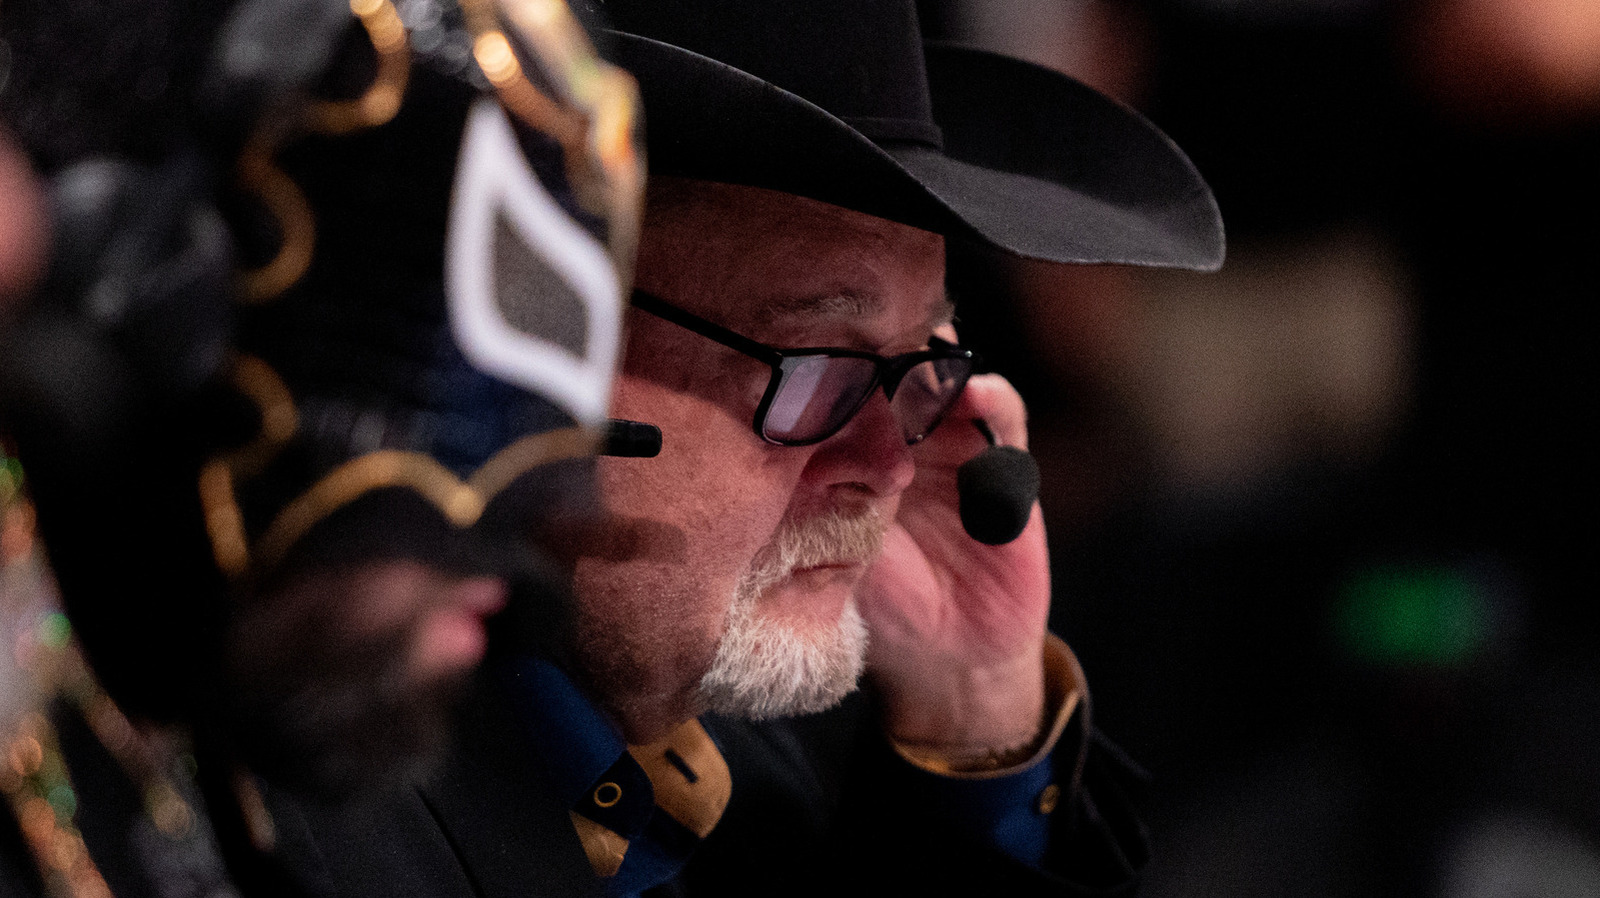 Big Jim Ross Entrance At AEW All In Reportedly Didn't Happen Due To Punk/Perry Fight